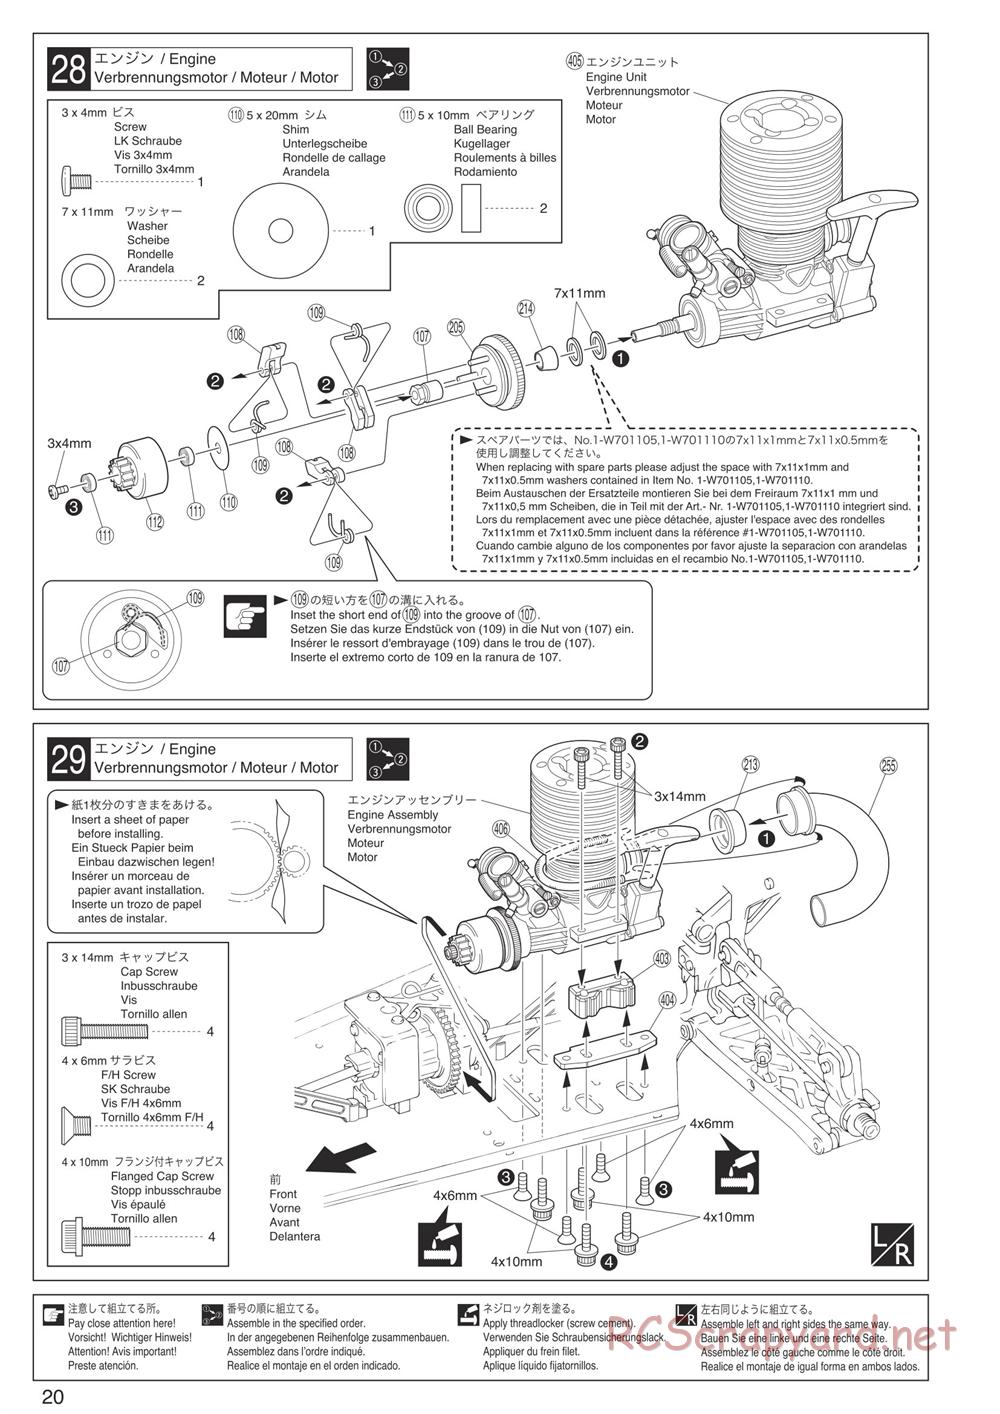 Kyosho - Inferno Neo Race Spec - Manual - Page 20